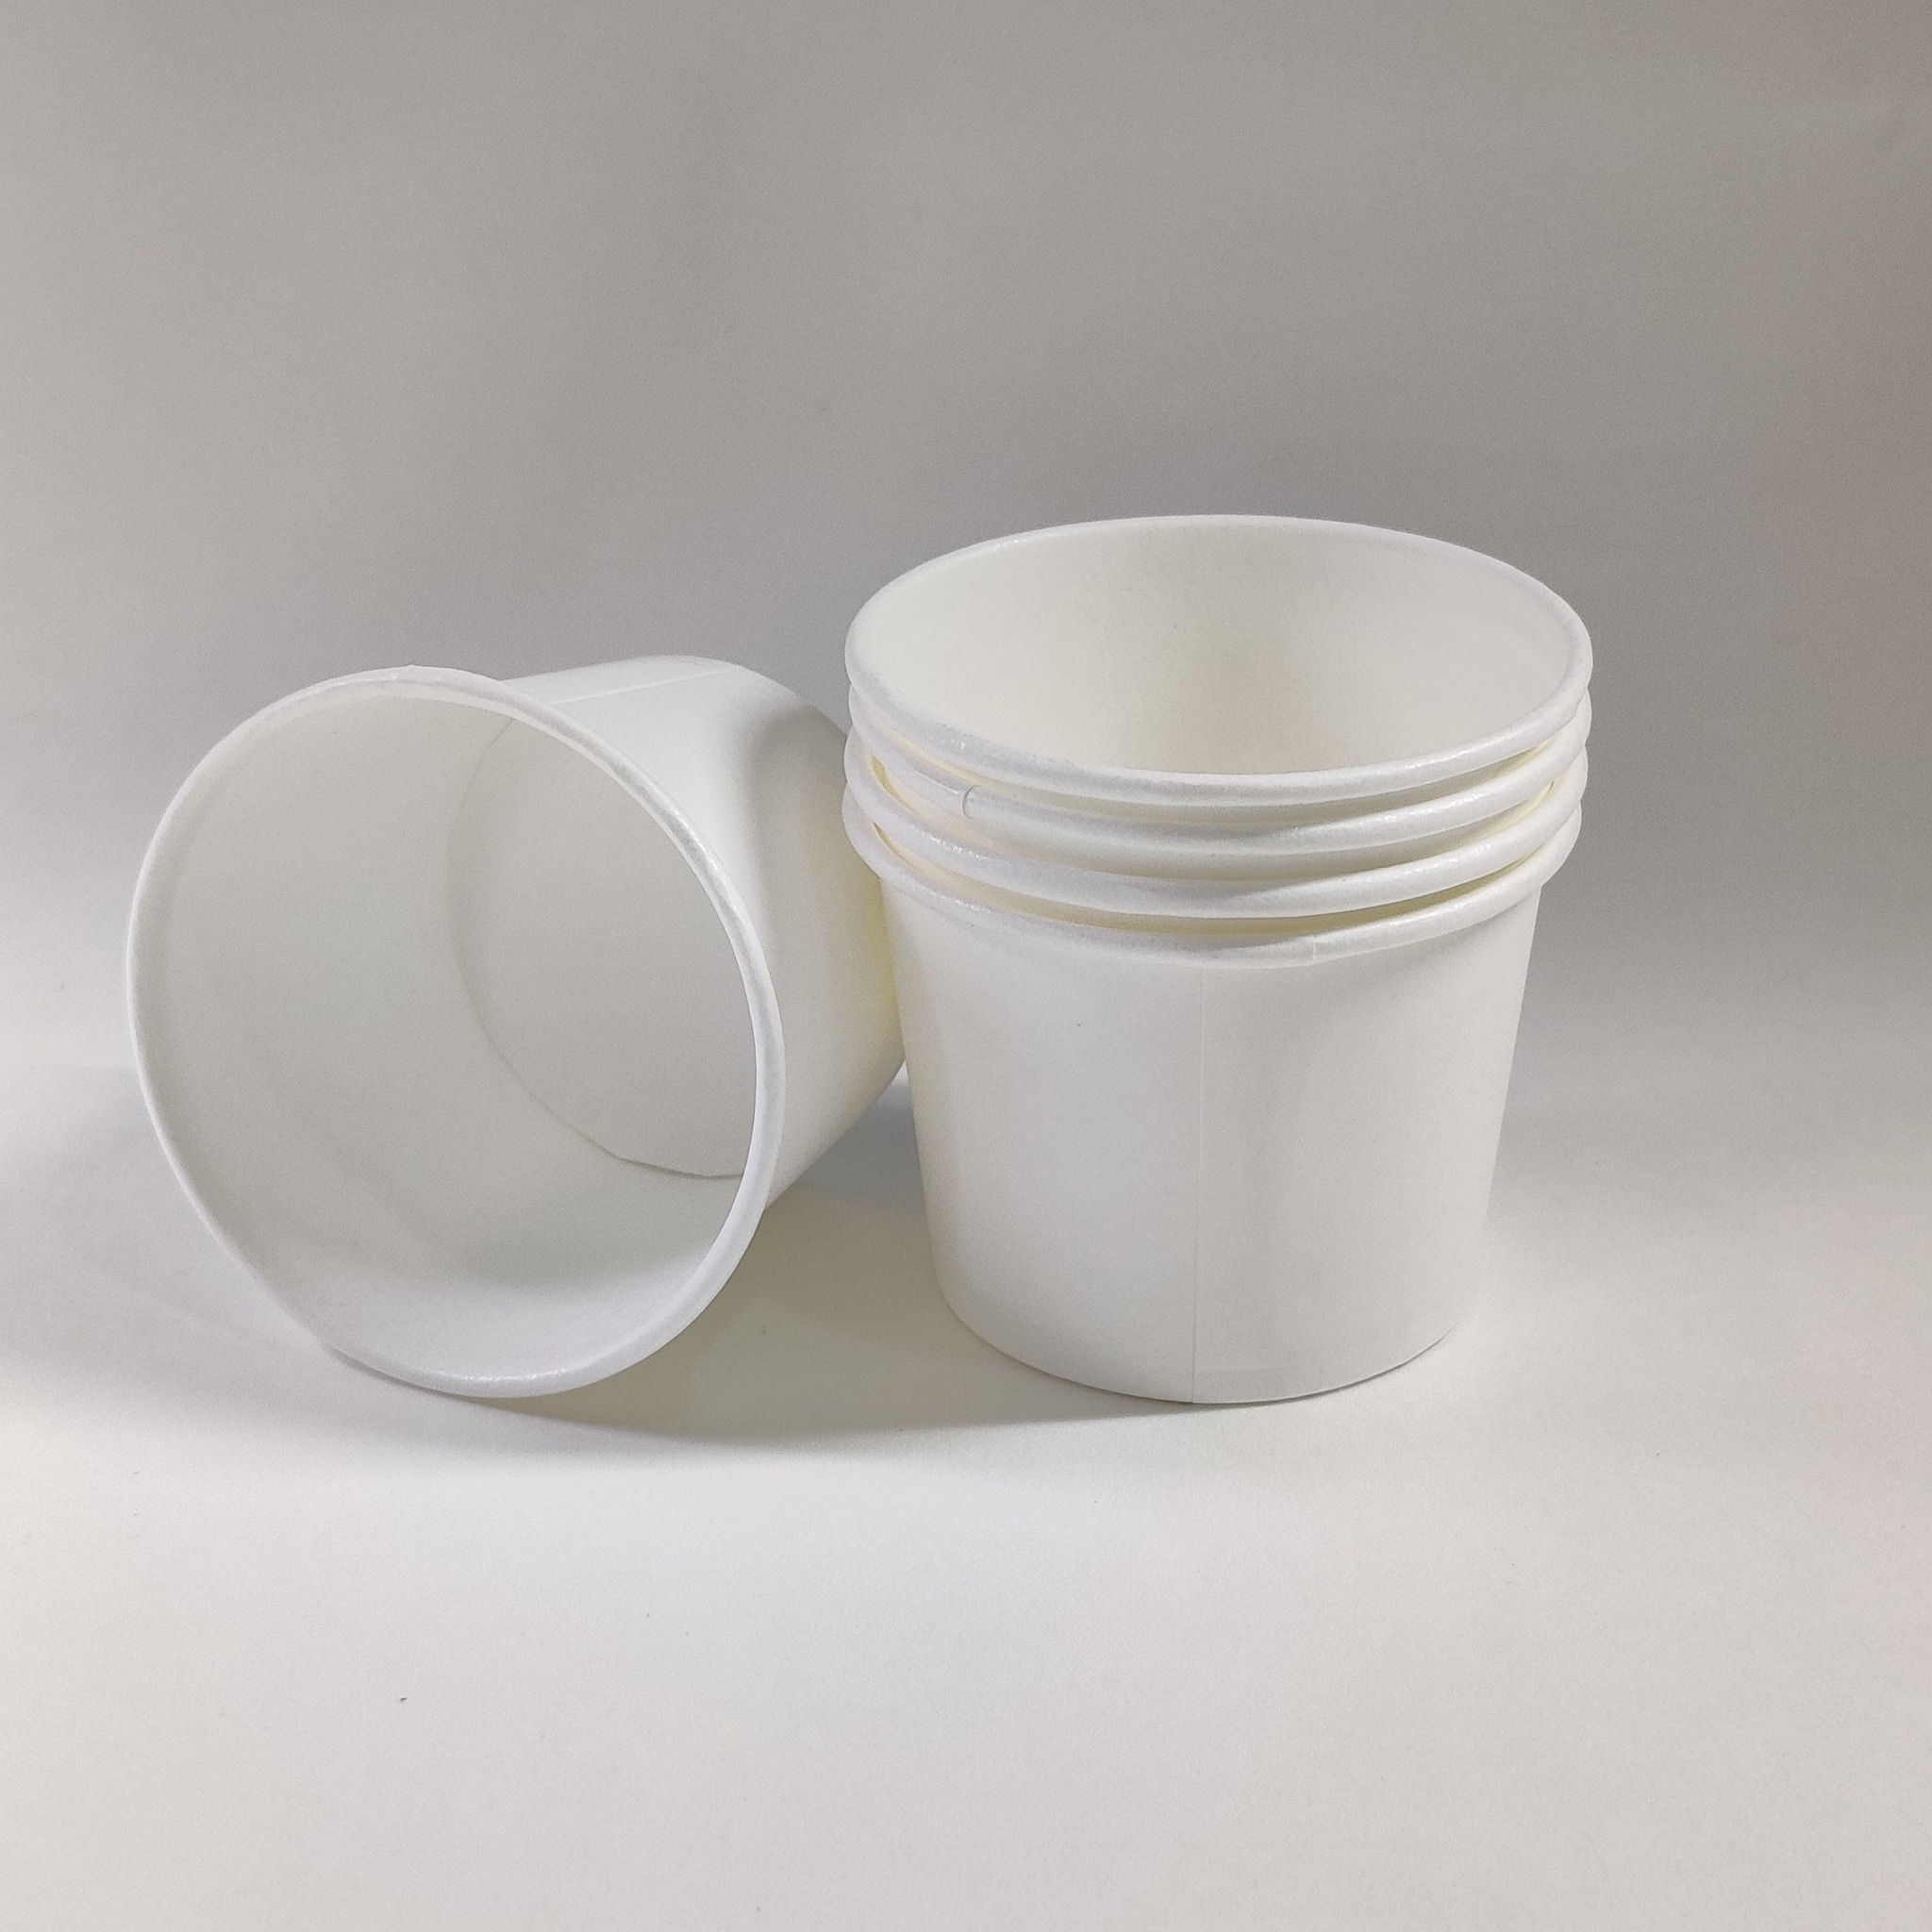 Hot Paper Cups: Buy Hot Paper Cups at Best Prices Online 